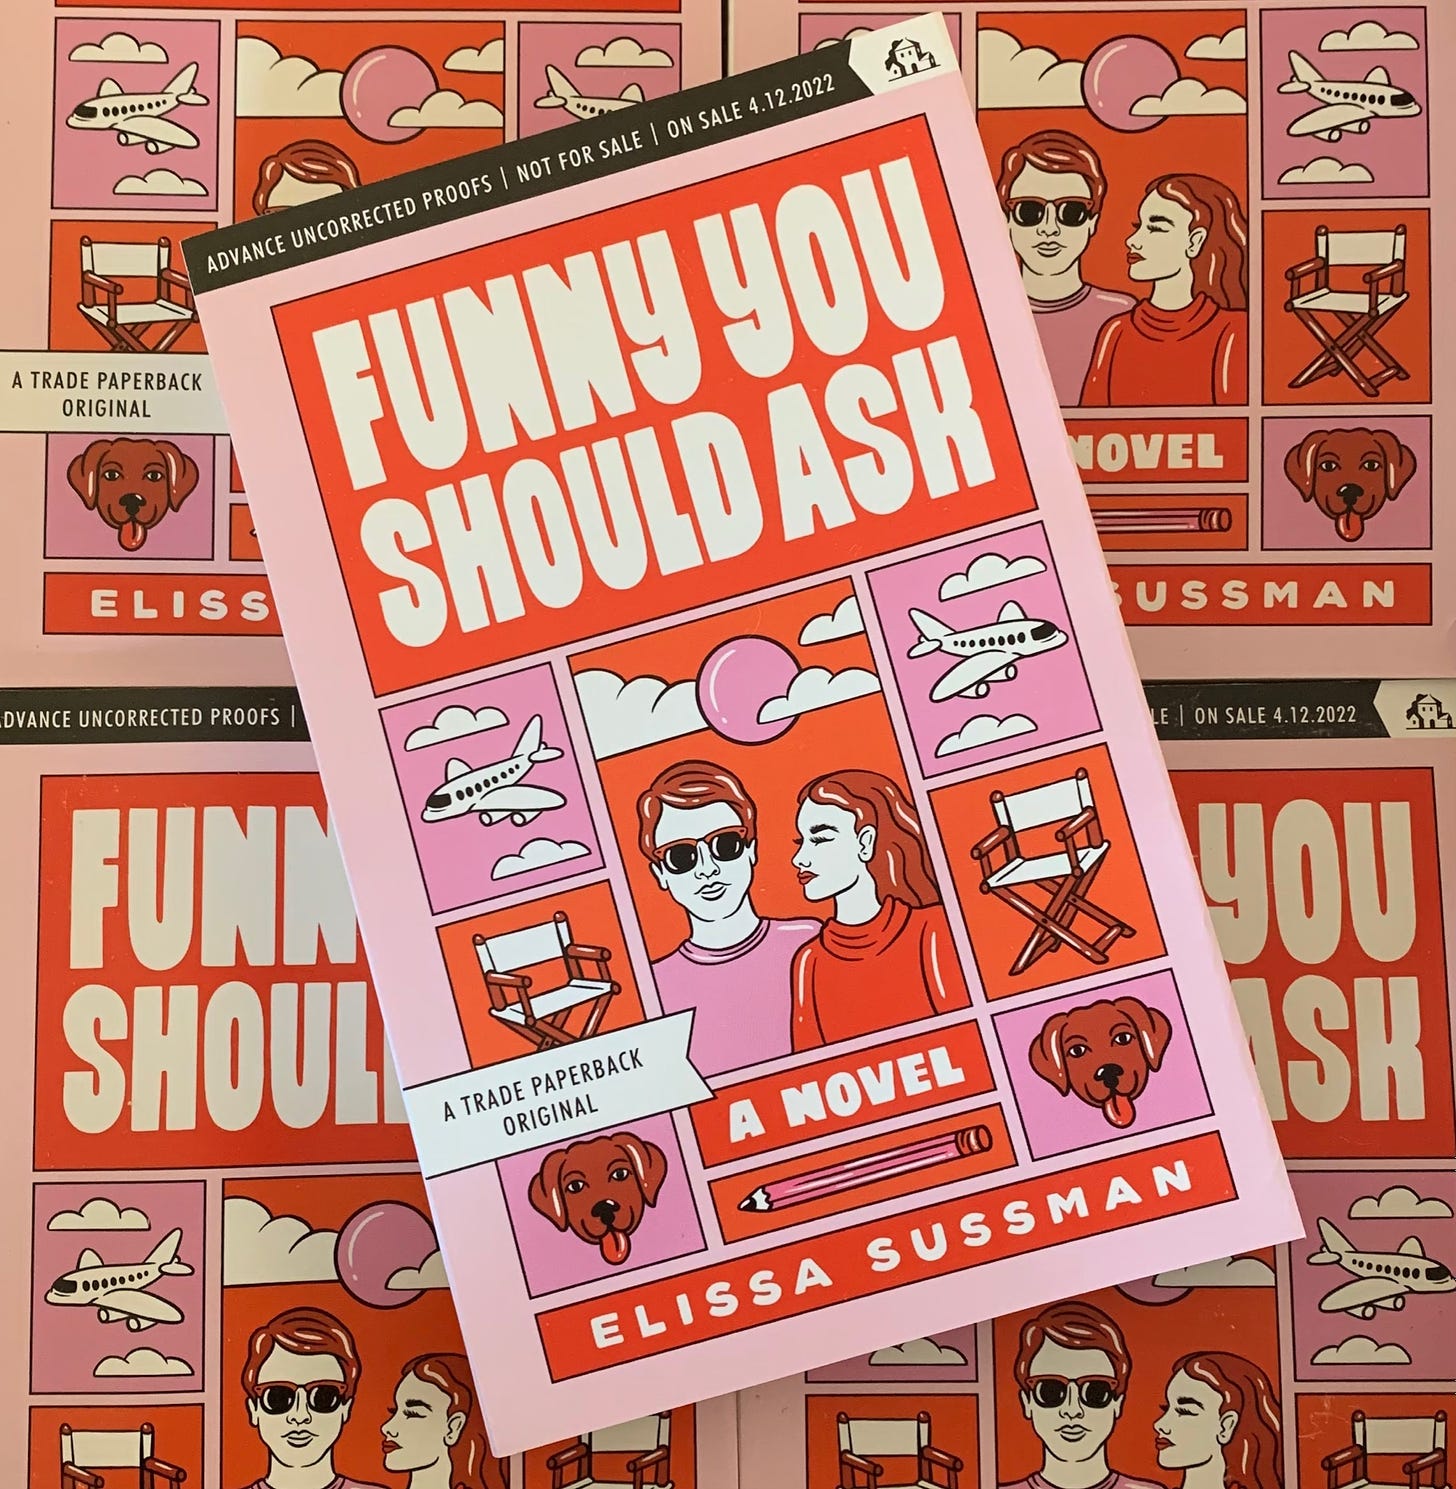 Elissa Sussman on Twitter: "FUNNY YOU SHOULD ASK ARCs are here and I'm in  love! Thank you to everyone at @randomhouse - is it April 12th yet?!  https://t.co/fXka1ojmQq" / Twitter